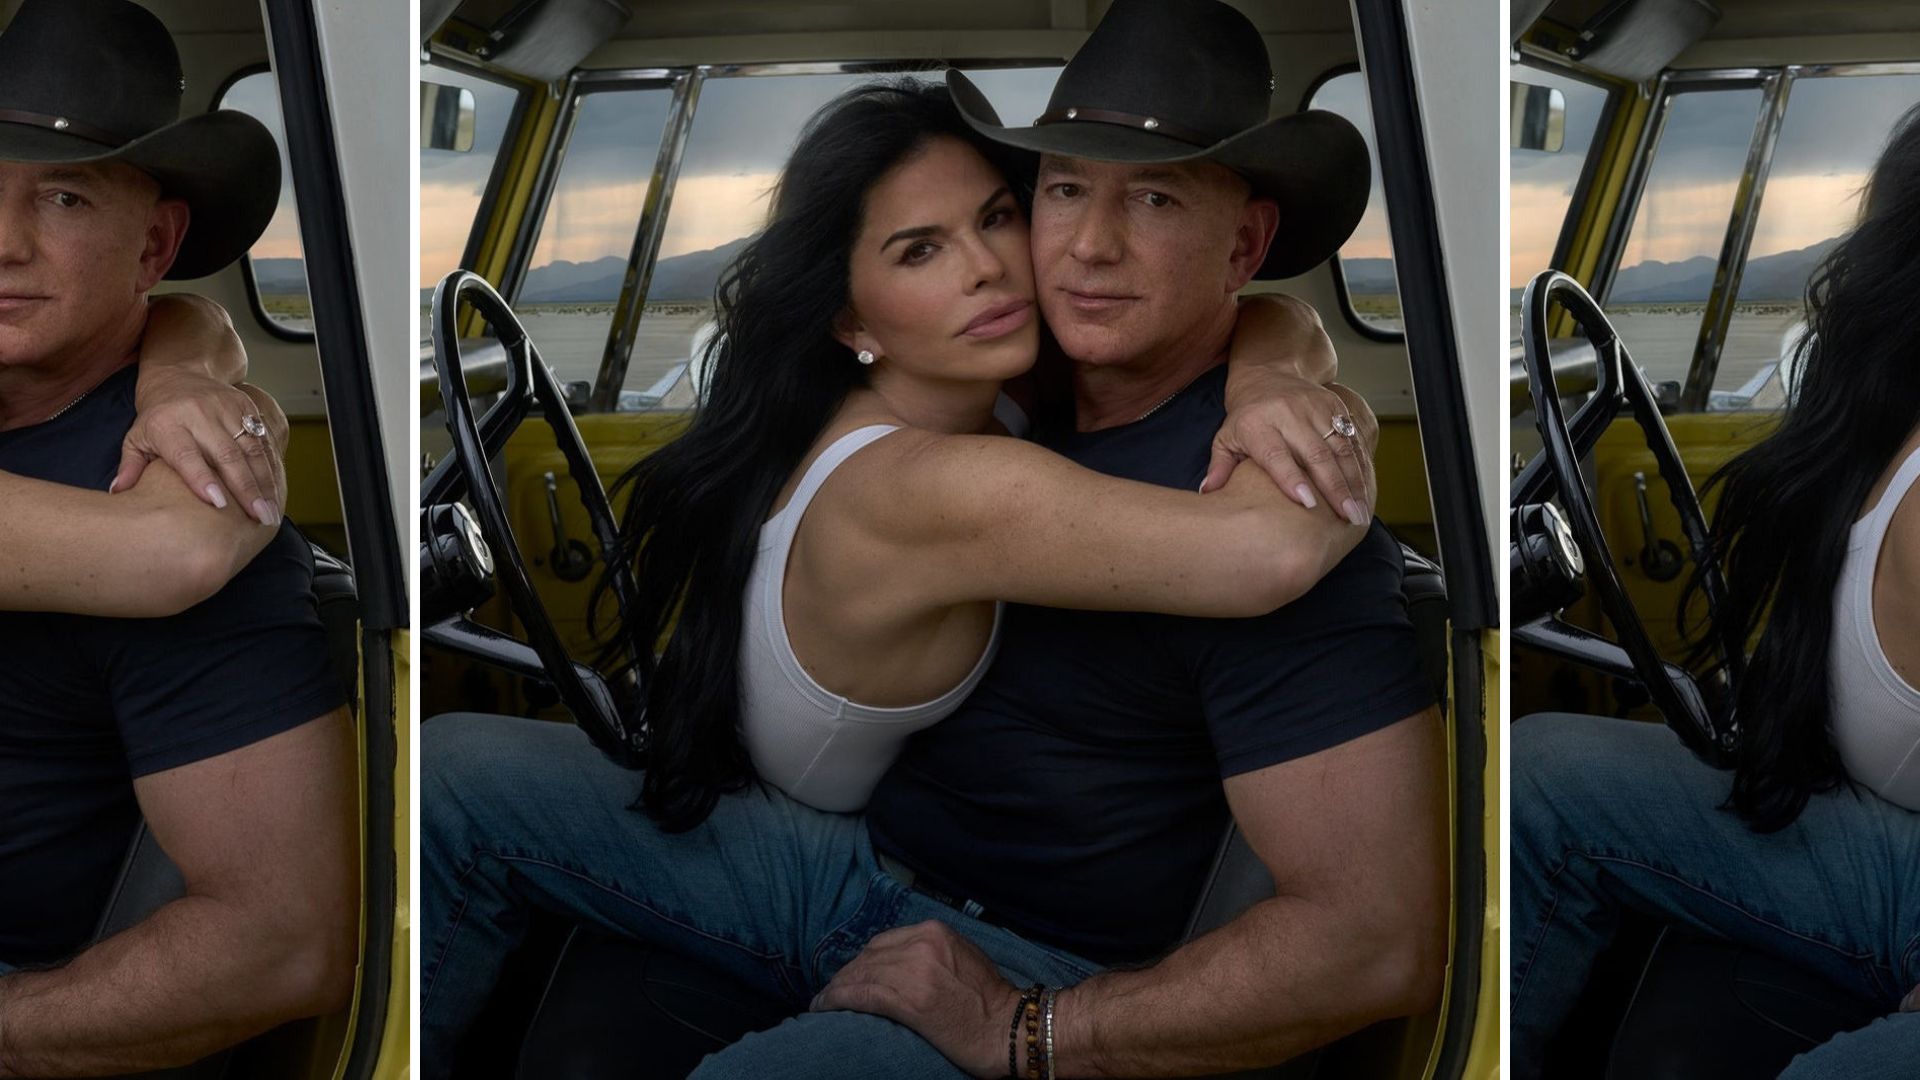 Why Jeff Bezos' cowboy hat annoys real cowboys // Source: Lauren Sánchez and Jeff Bezos photographed by Annie Leibovitz for Vogue US December 2023 / Instagram Screenshot